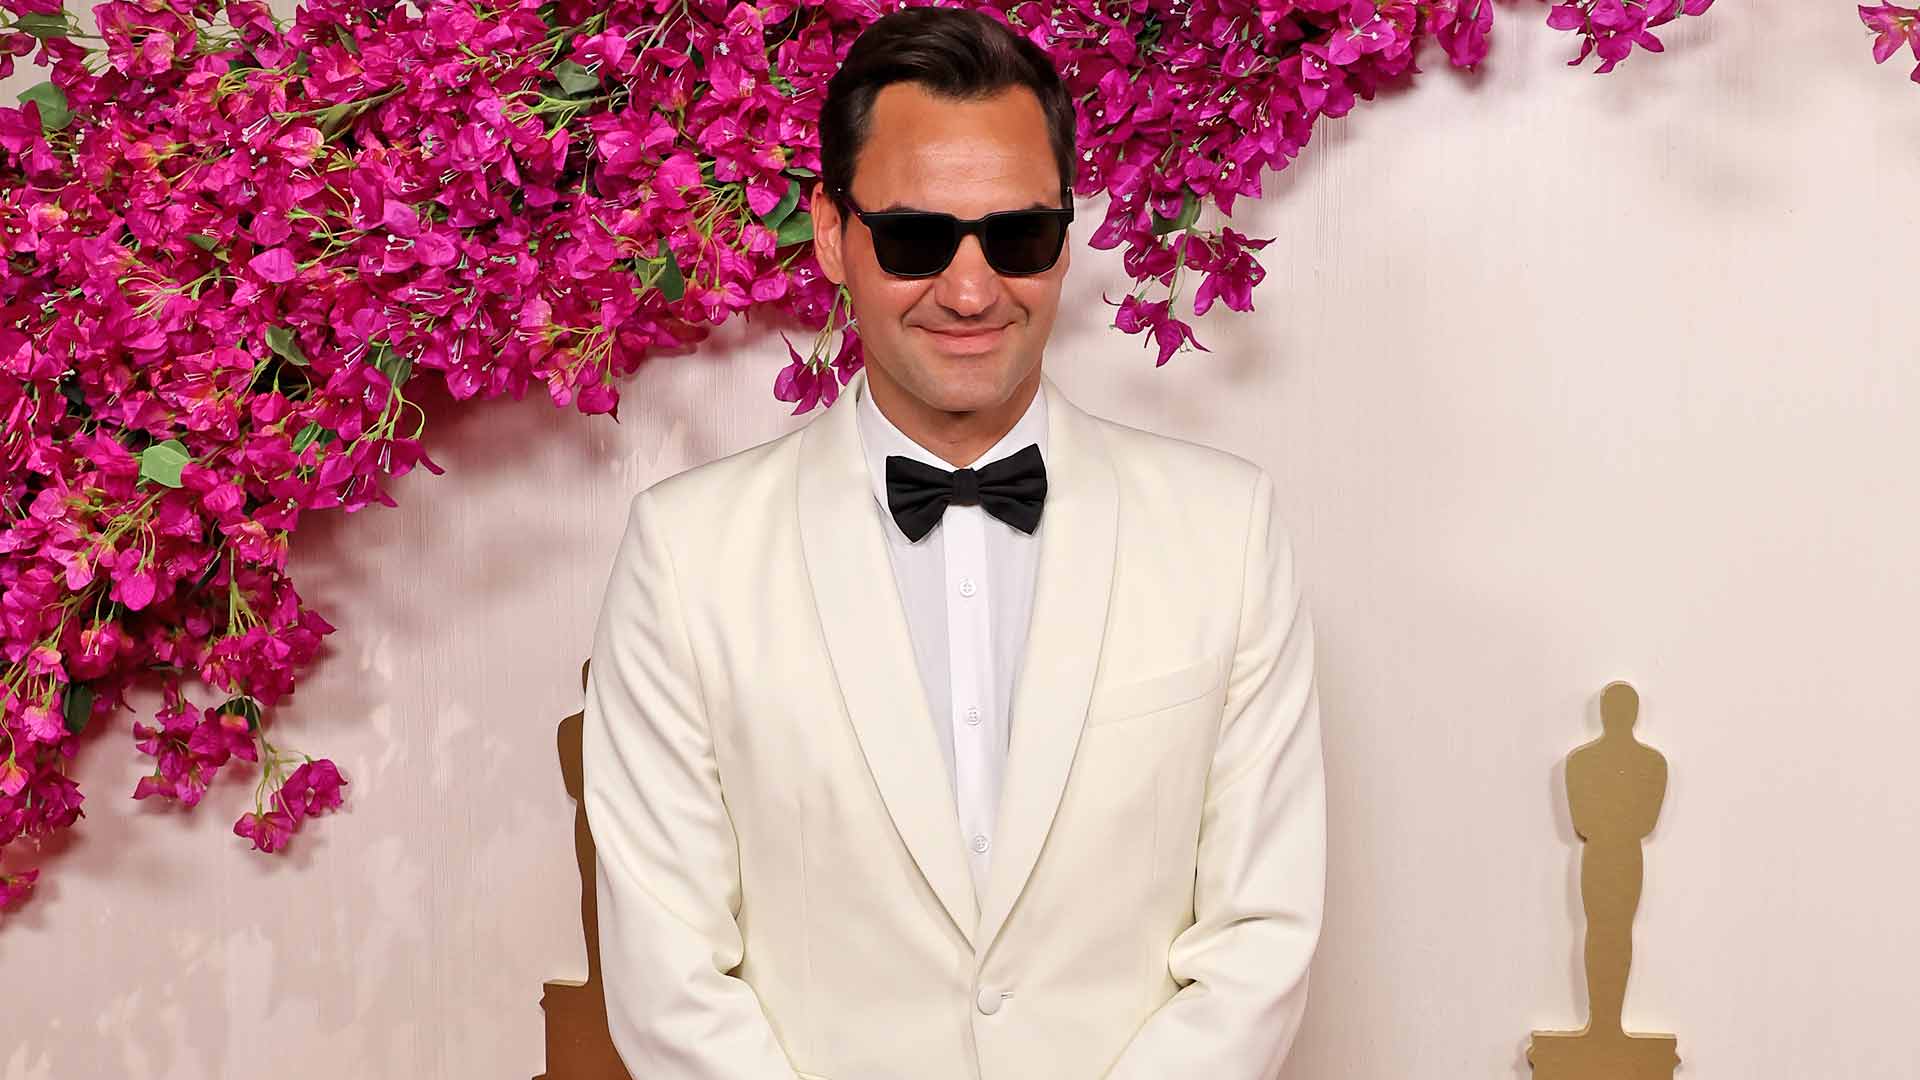 Roger Federer attends the Academy Awards on Sunday in Hollywood.